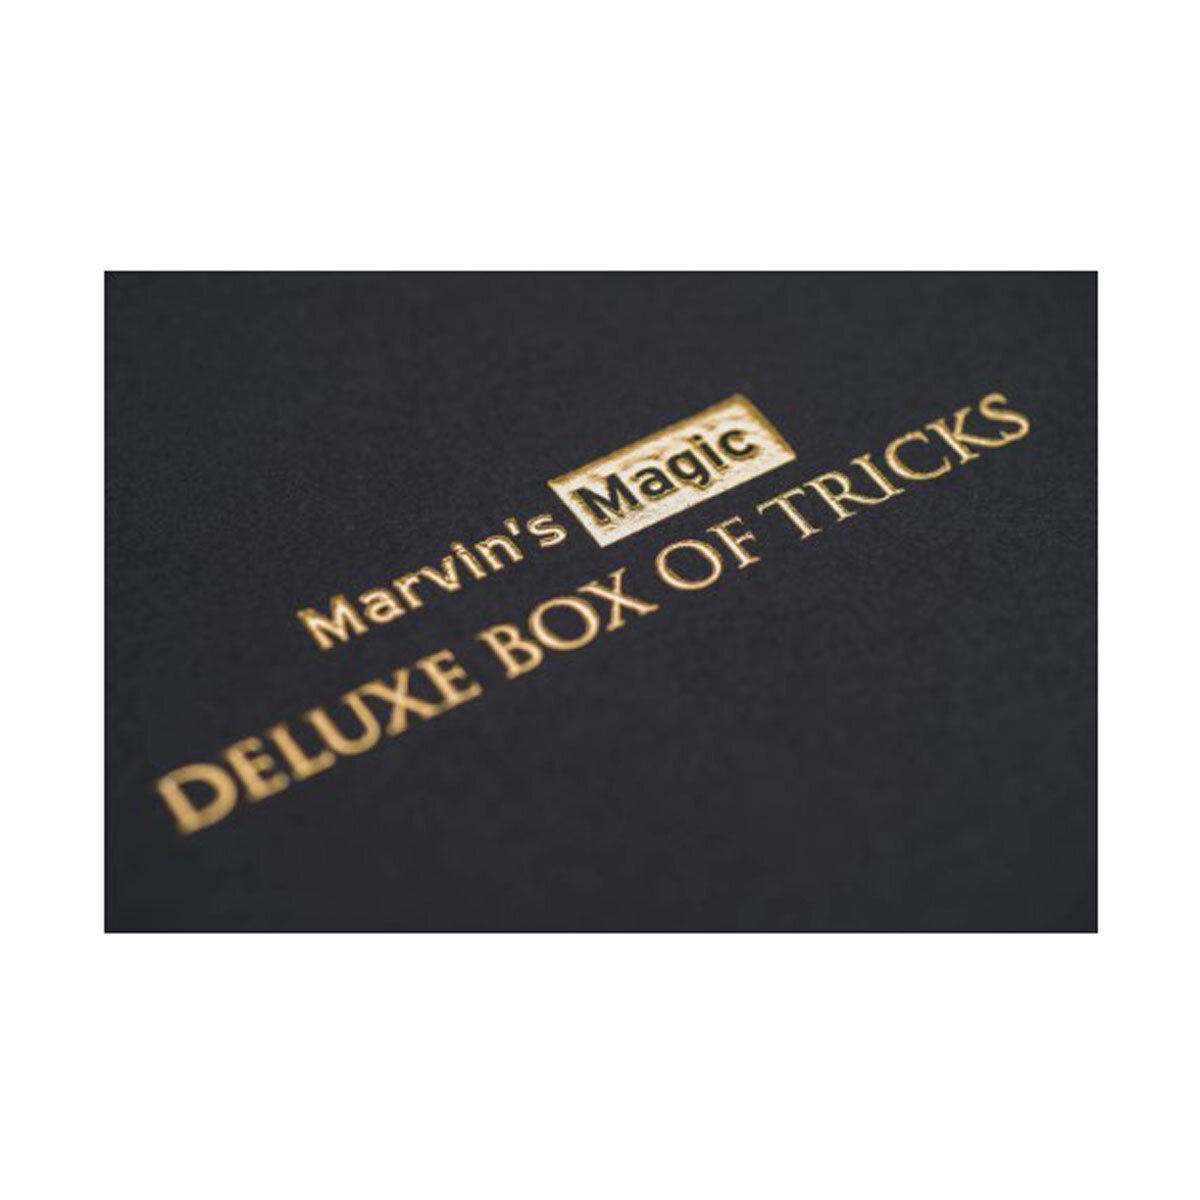 Buy Marvins Magic Deluxe Box of Tricks Overview Image at Costco.co.uk